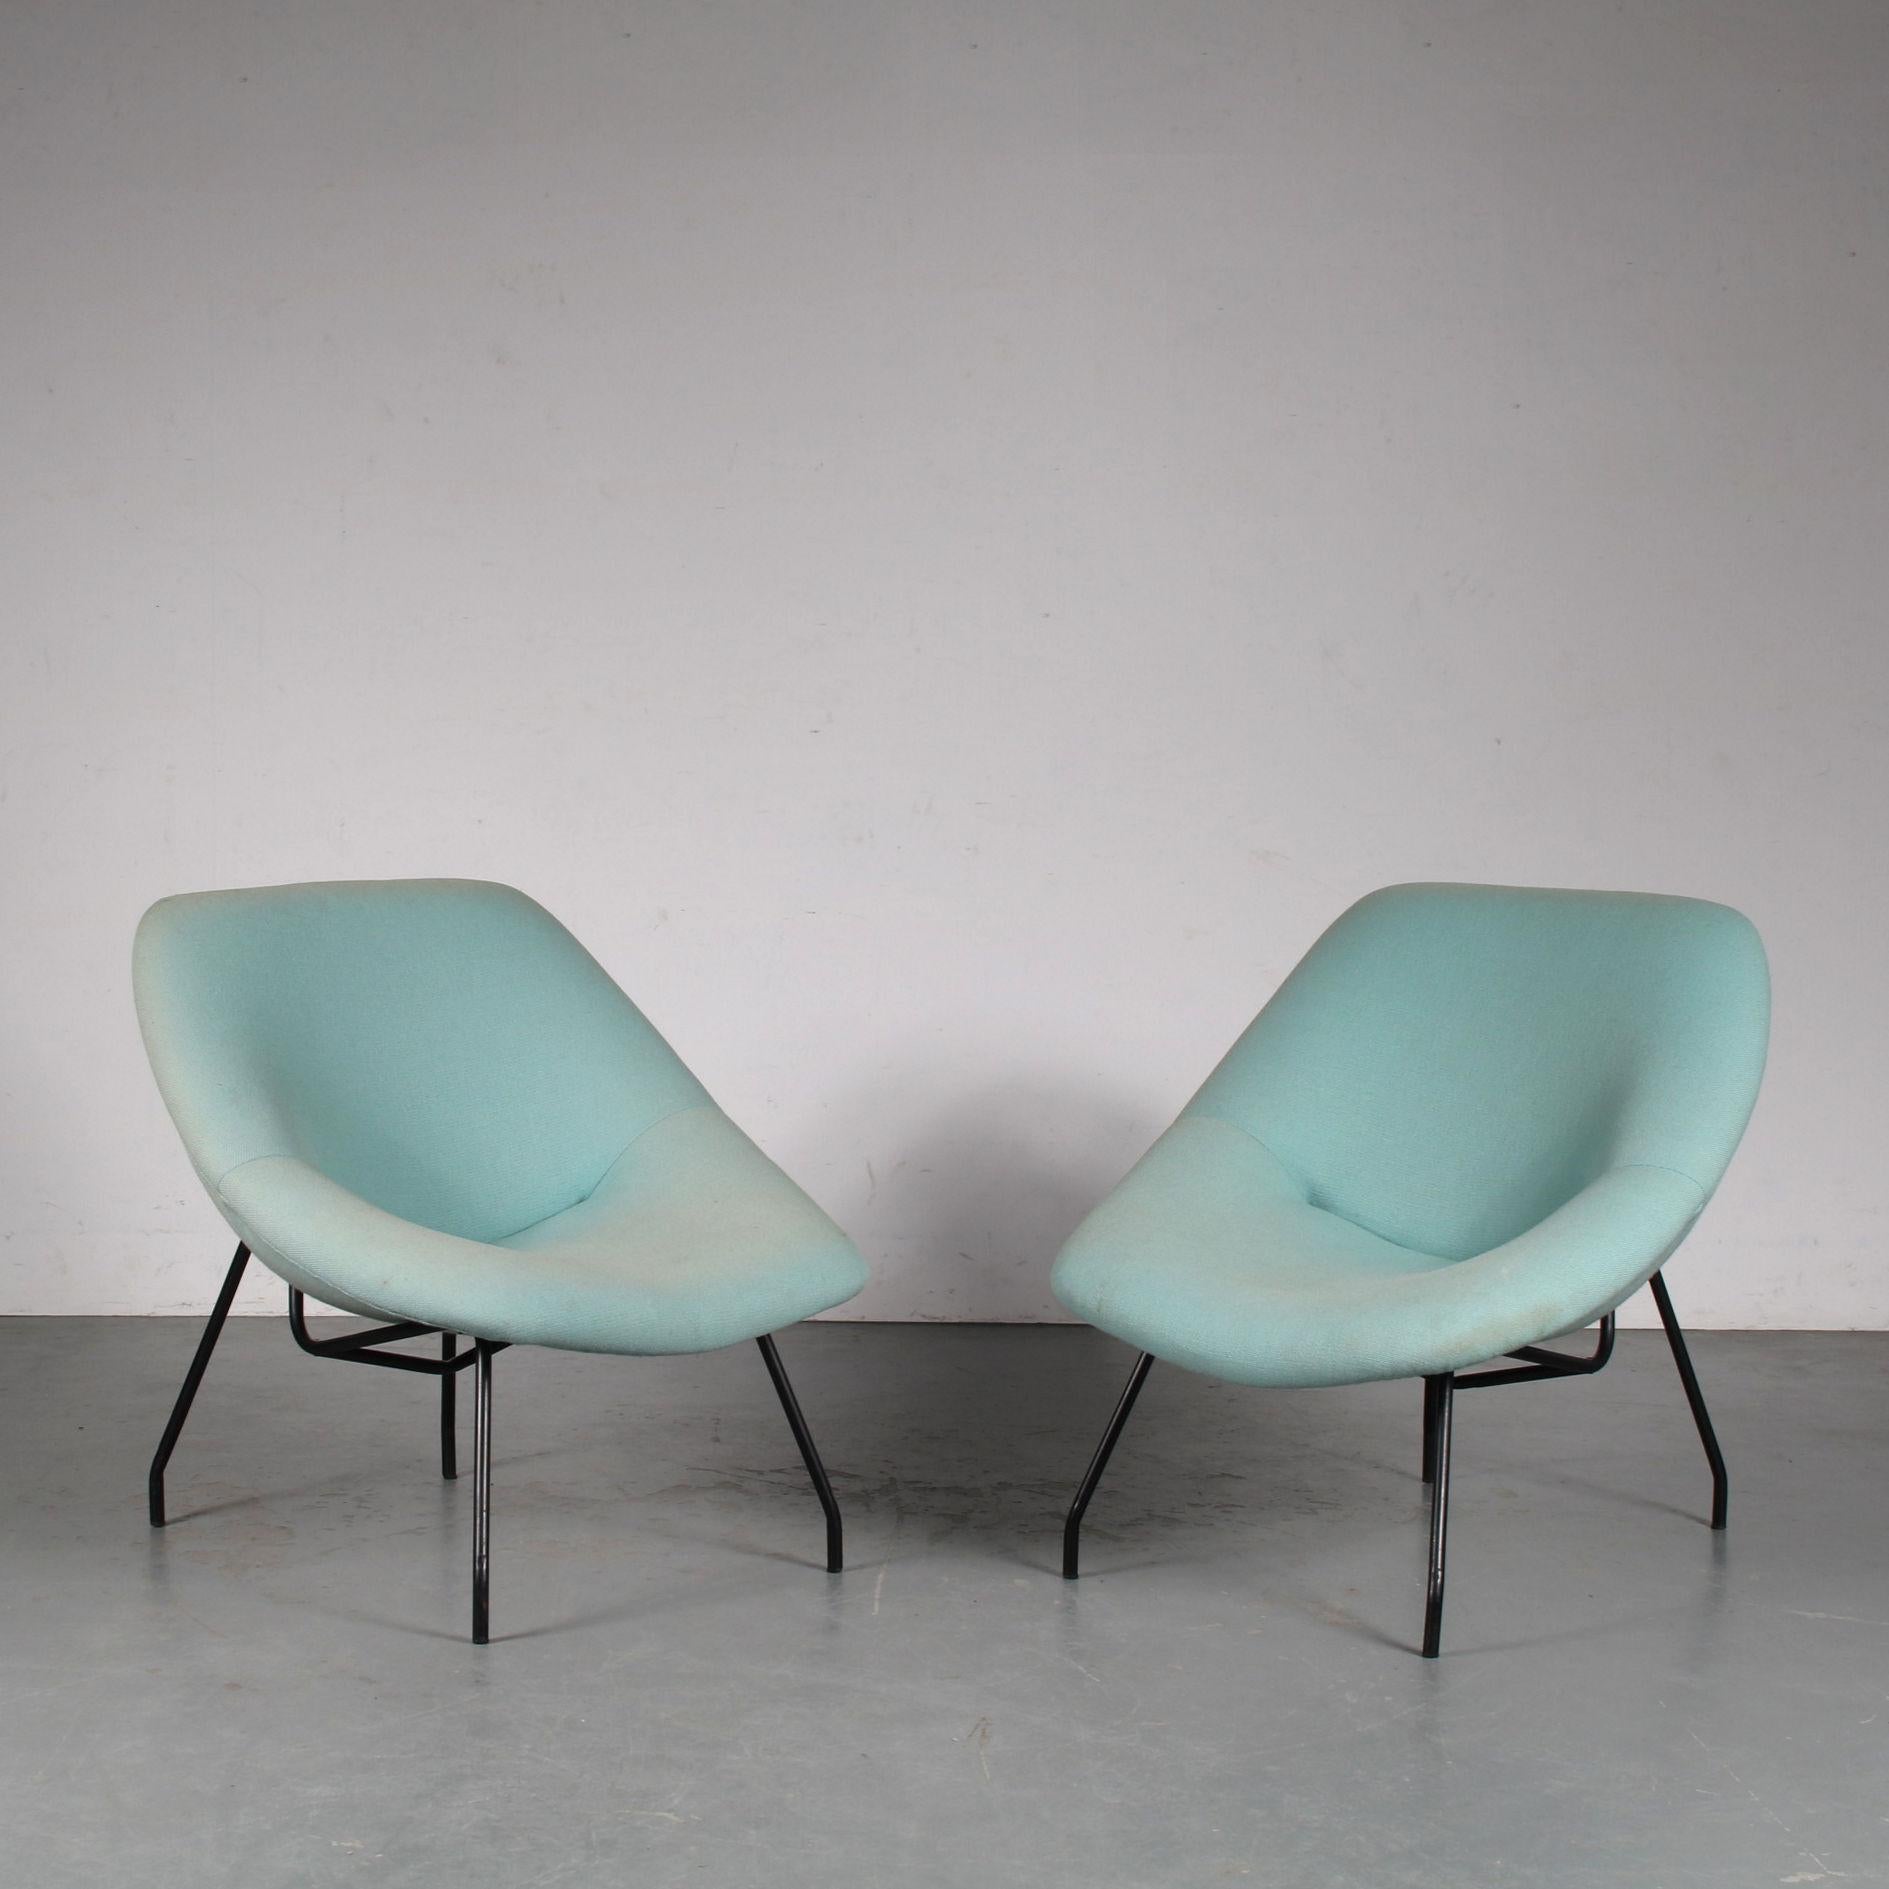 A beautiful pair of easy chair manufactured by GAR in France around 1950.

They have thin black lacquered metal bases with green / blue fabric upholstery. A beautiful combination of materials and colours that gives the set a unique style! They